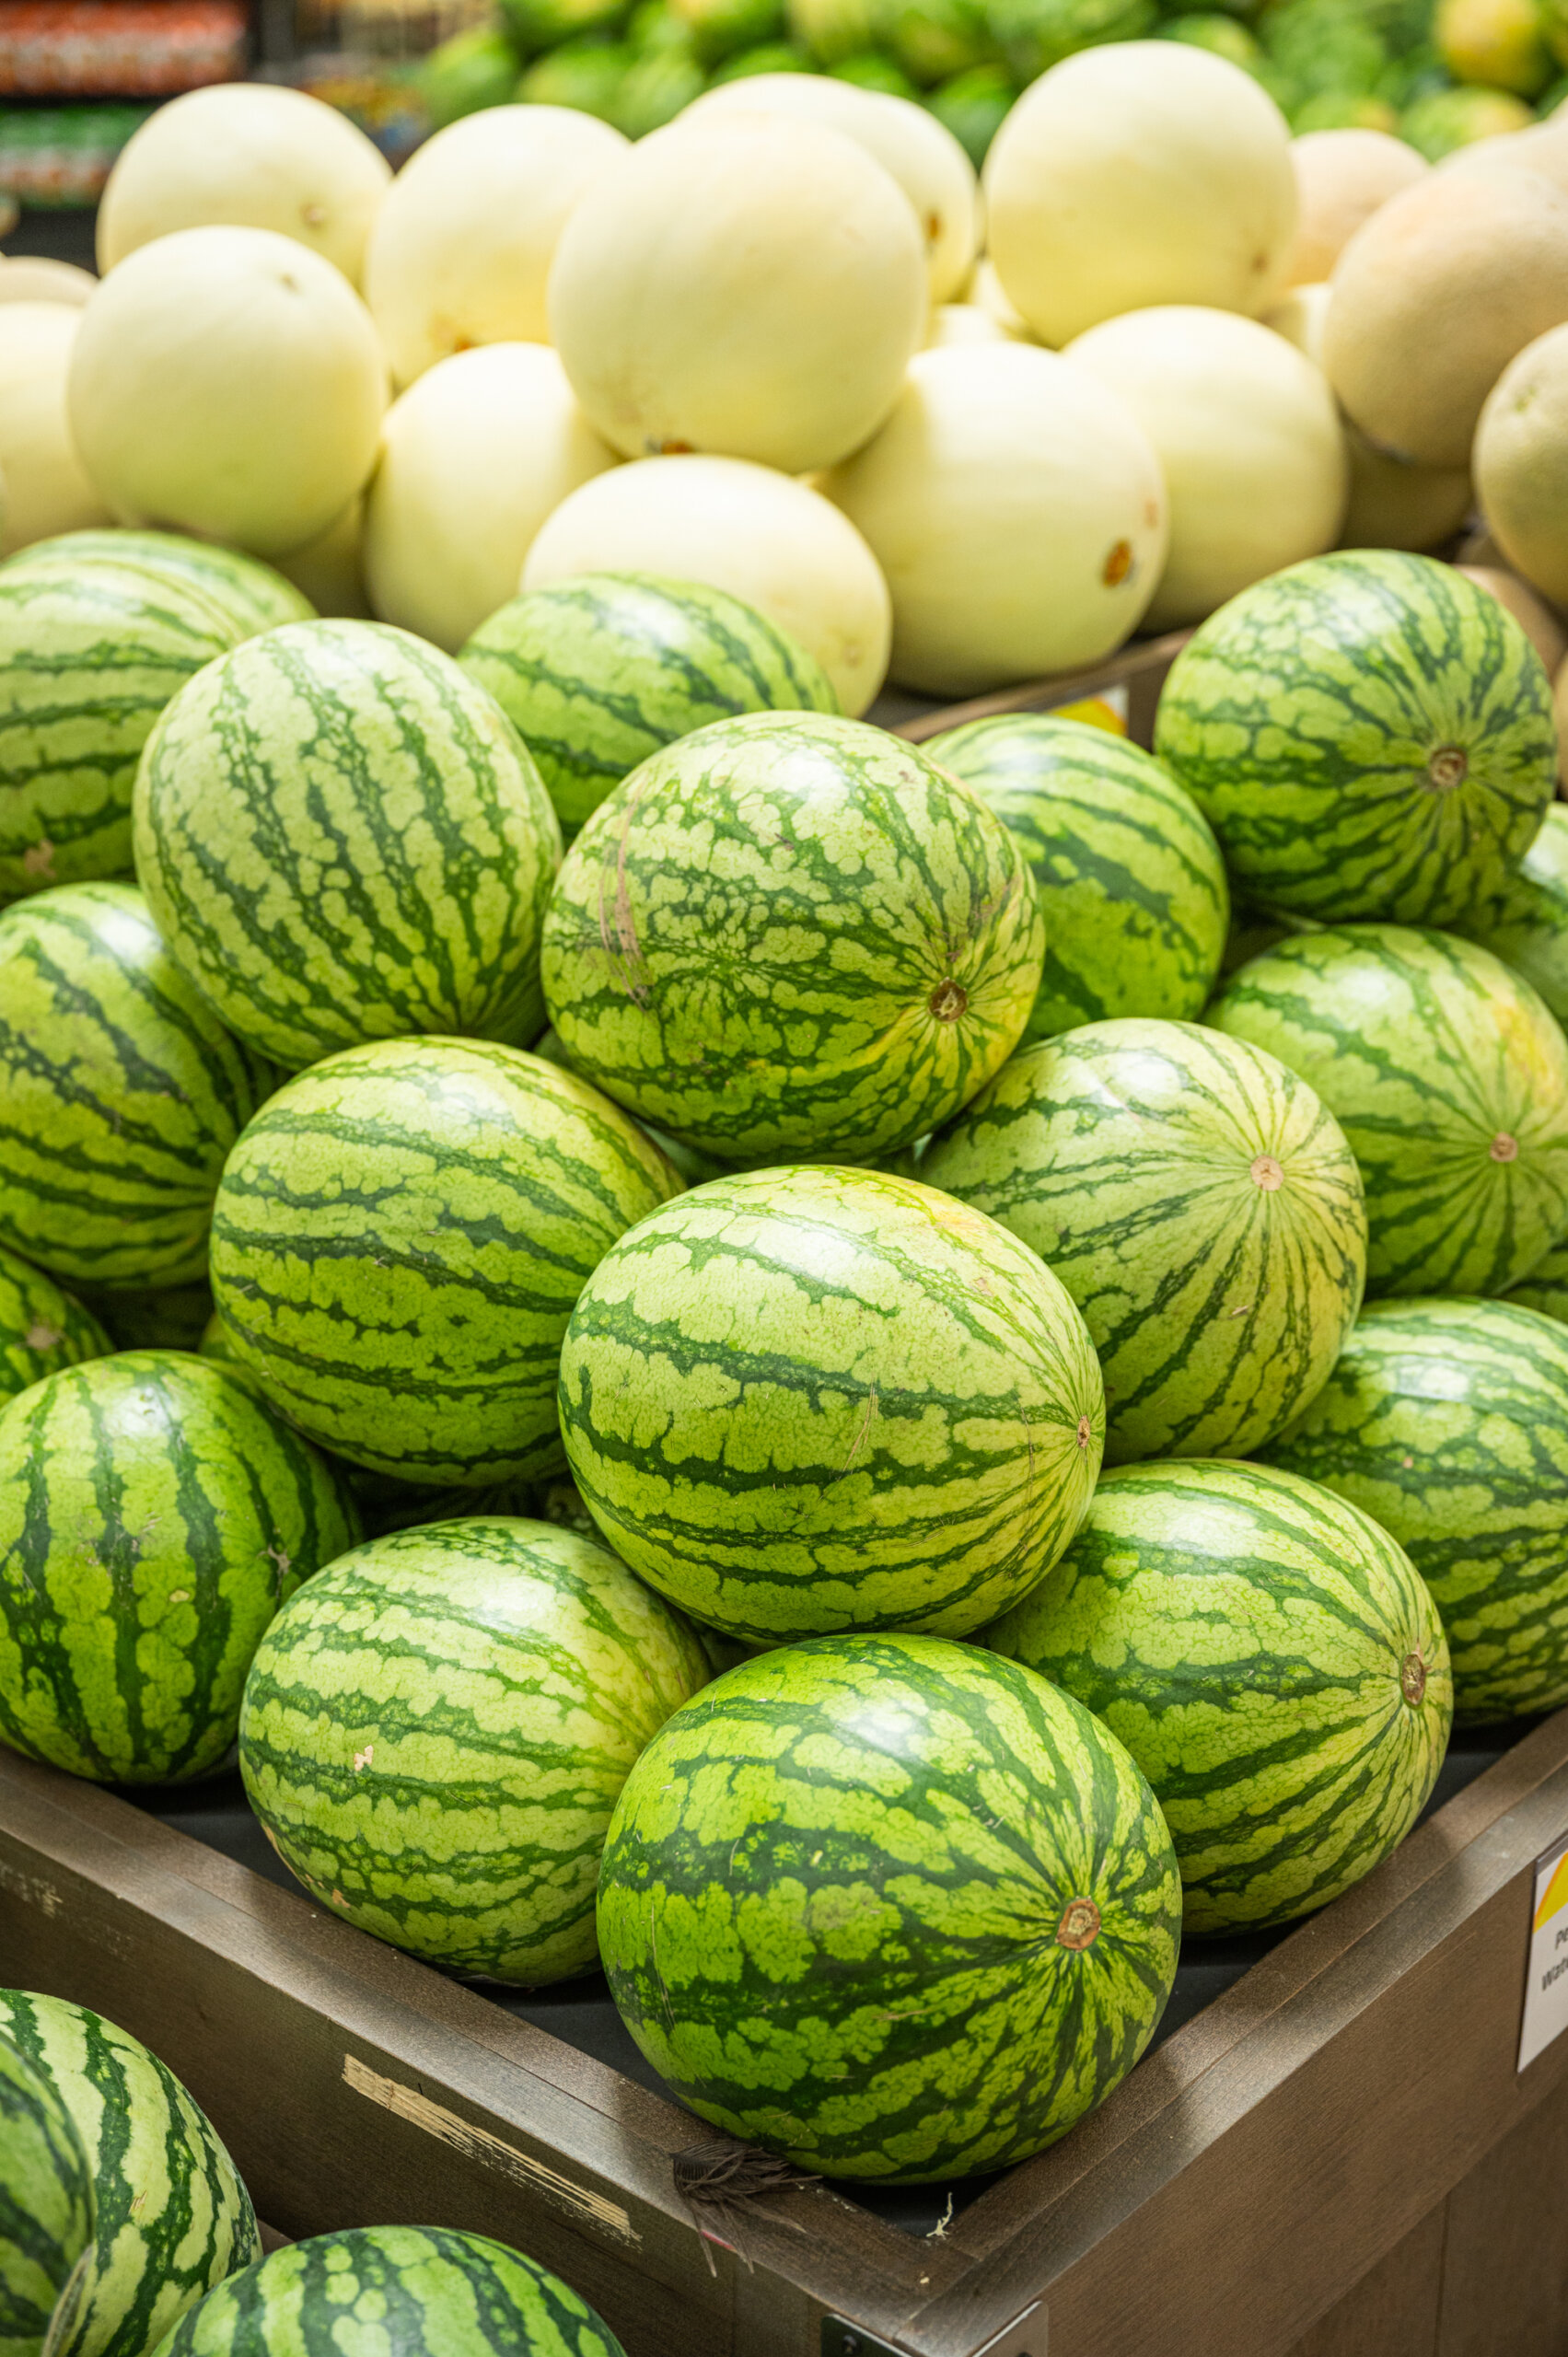 Fresh California watermelons and cantaloupe stacked in a grocery store display